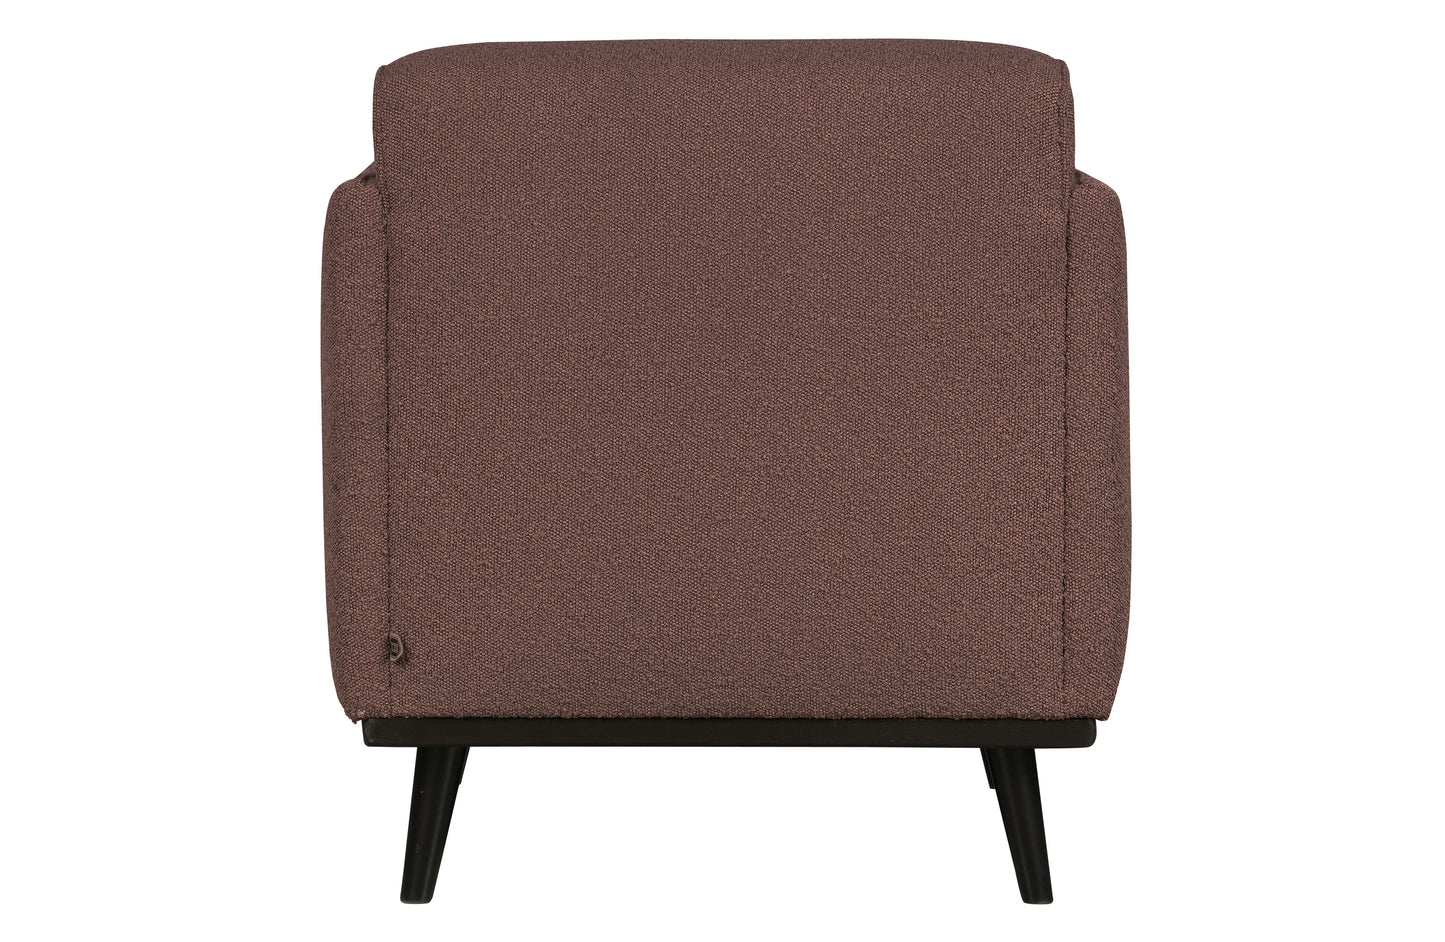 BEPUREHOME | Statement-Sessel Boucle Coffee